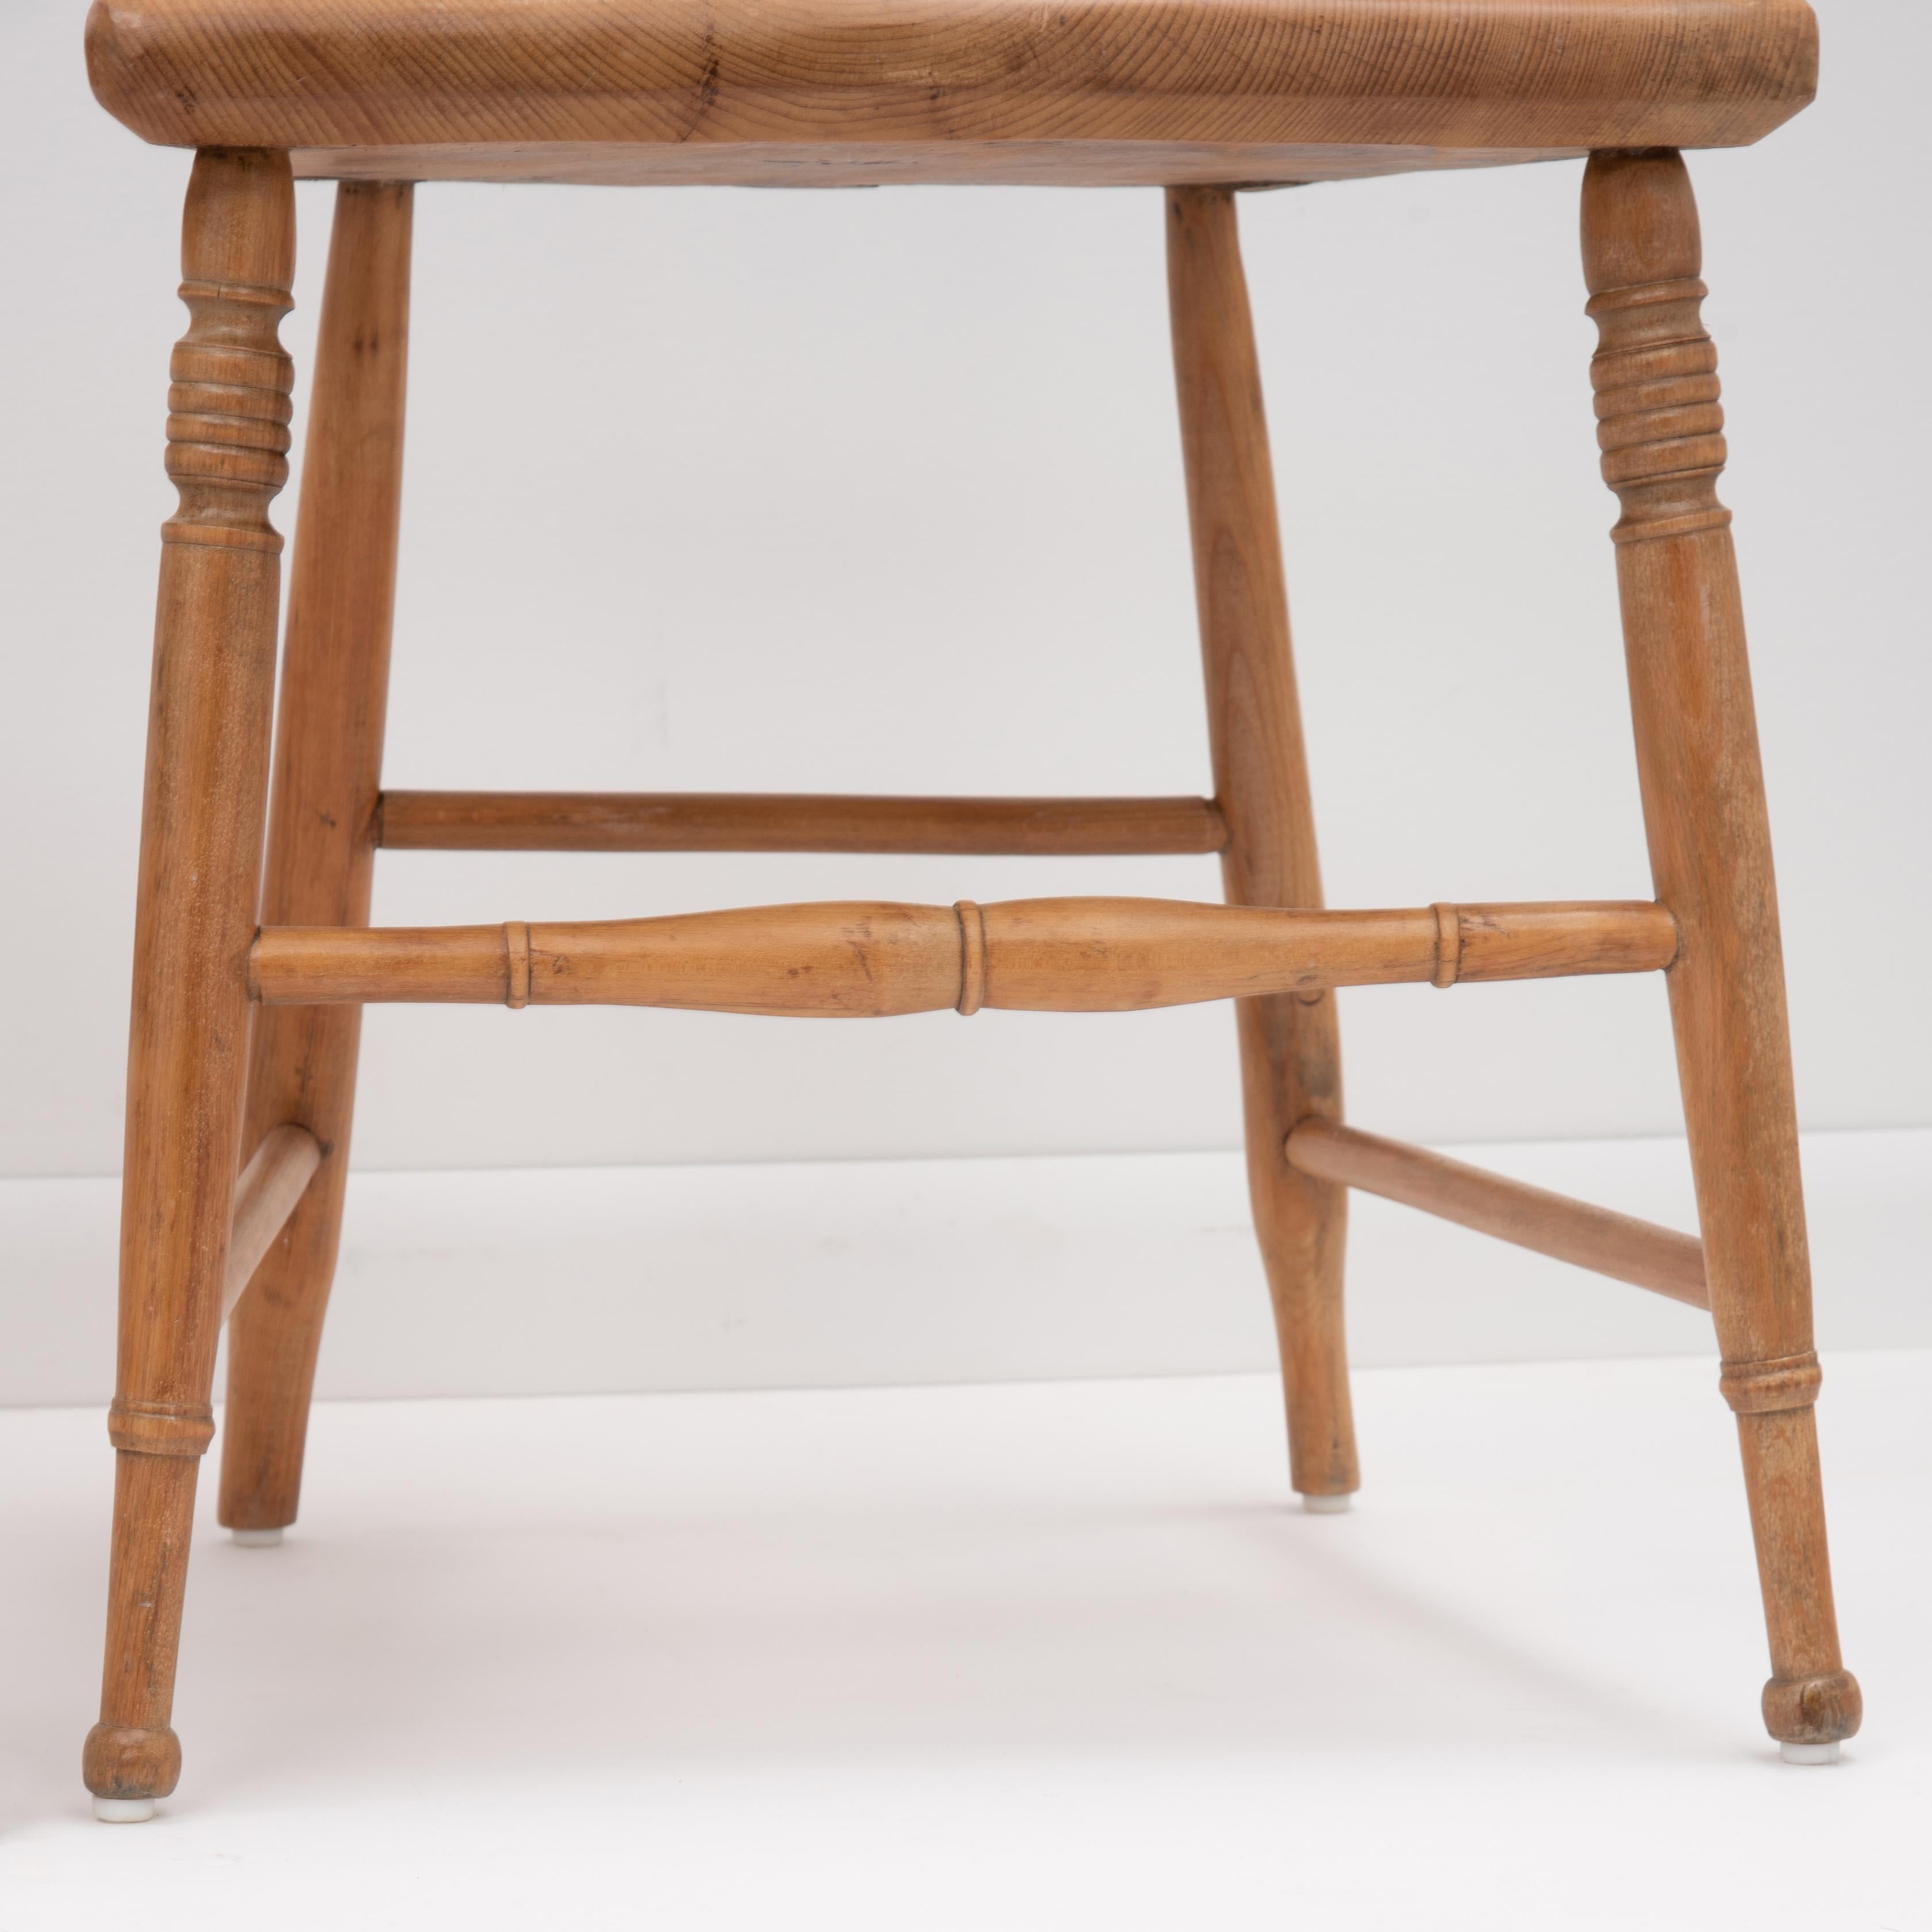 English Scrubbed Pine Plank Seat Dining Chairs Farmhouse Cottage, a Set of Four For Sale 8